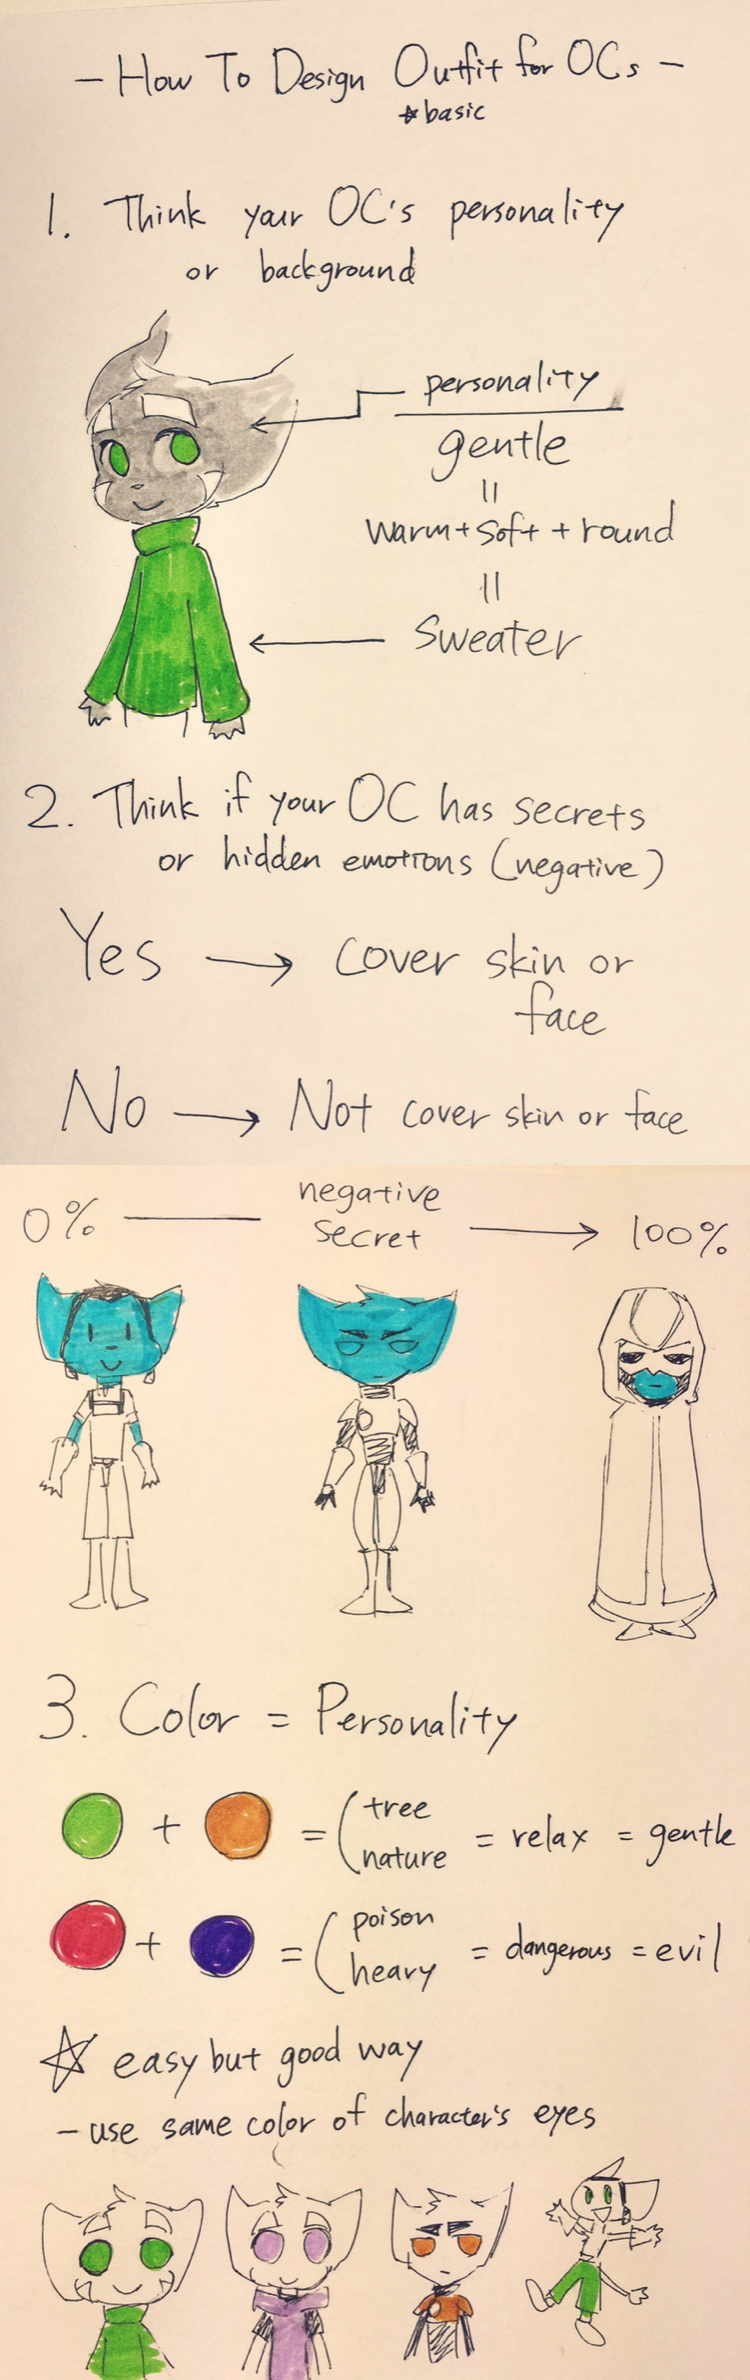 How To Design Outfit For Your Character(basic) by airbax on DeviantArt